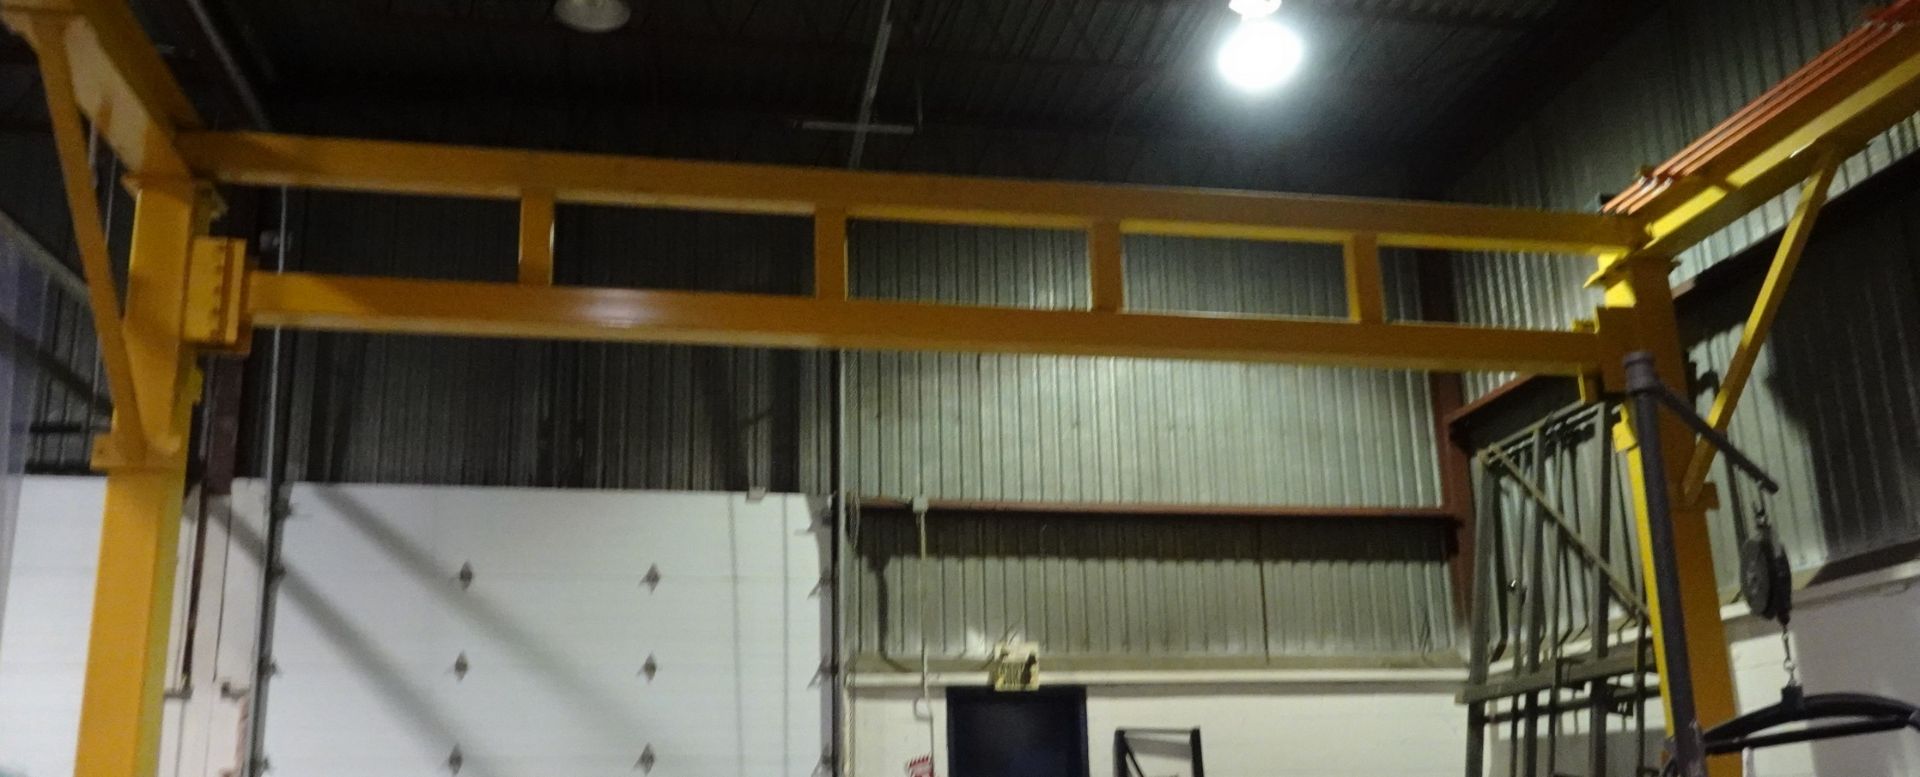 NELSON 7.5 TON CAPACITY FREE STANDING OVERHEAD CRANE SYSTEM, 25' SPAN, 20' UNDER THE HOOK 40'